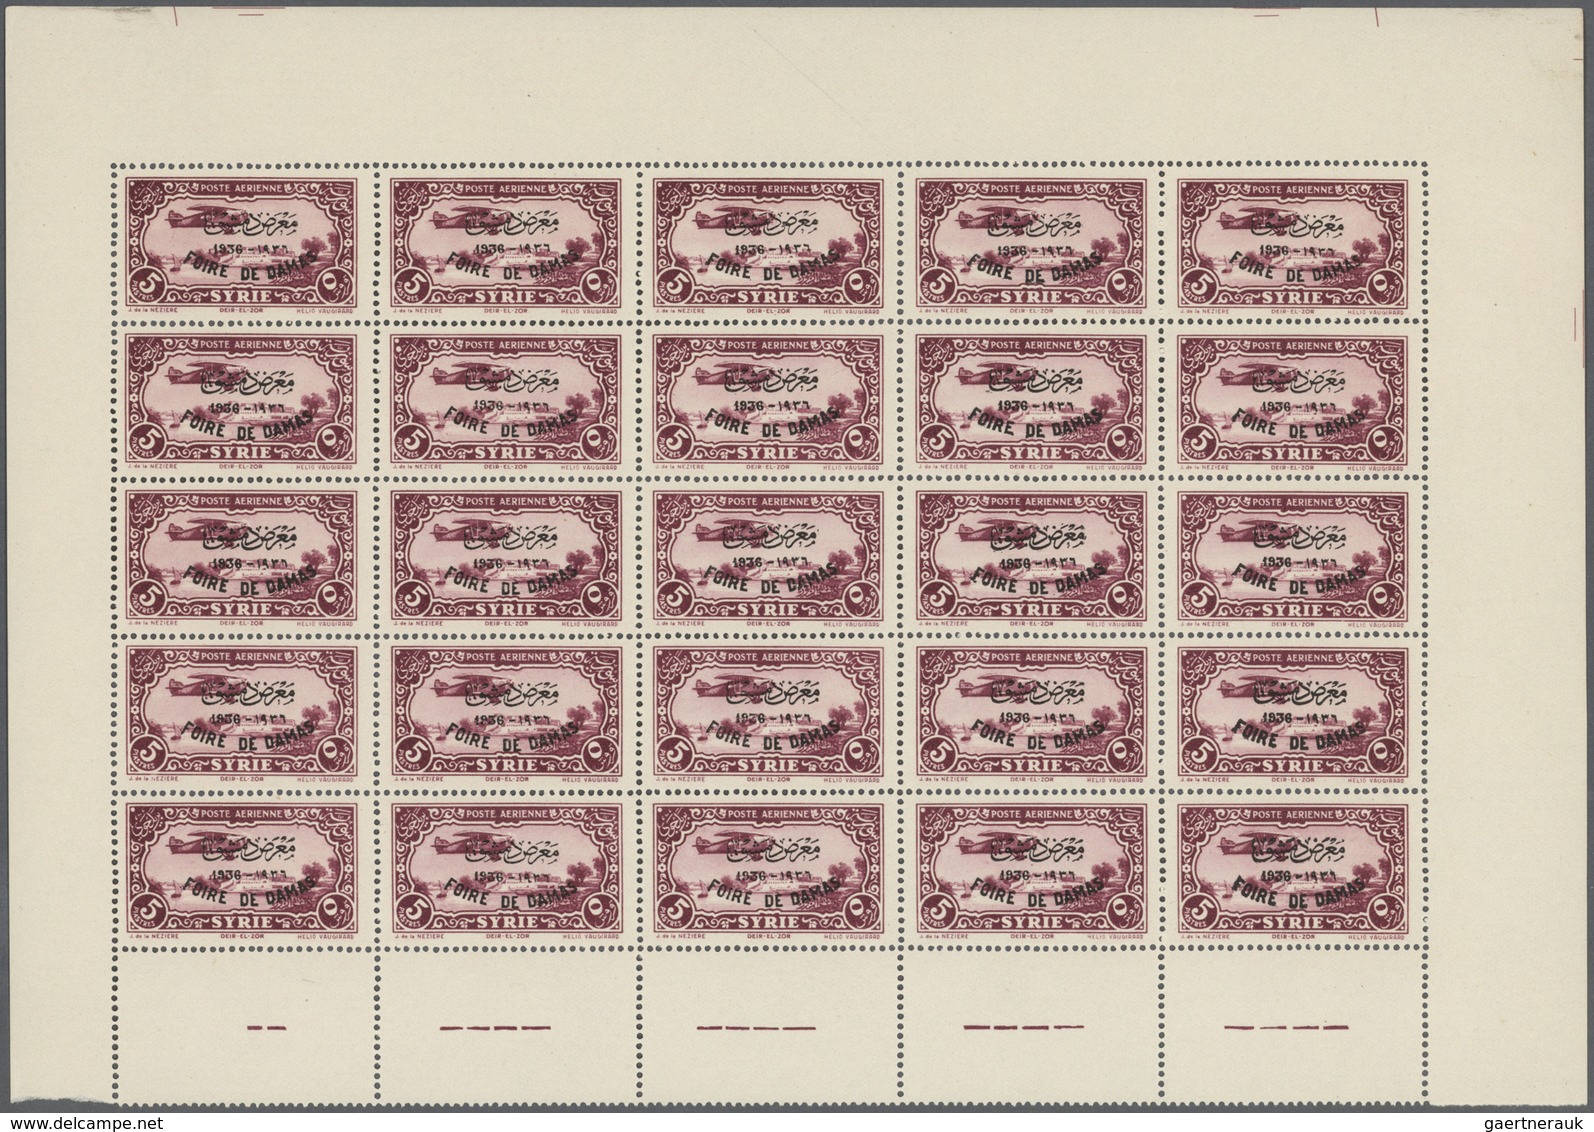 Syrien: 1930-1975, Mint Stock In Large Album With Sheets And Blocks, Including Early Air Mails, Over - Syrien